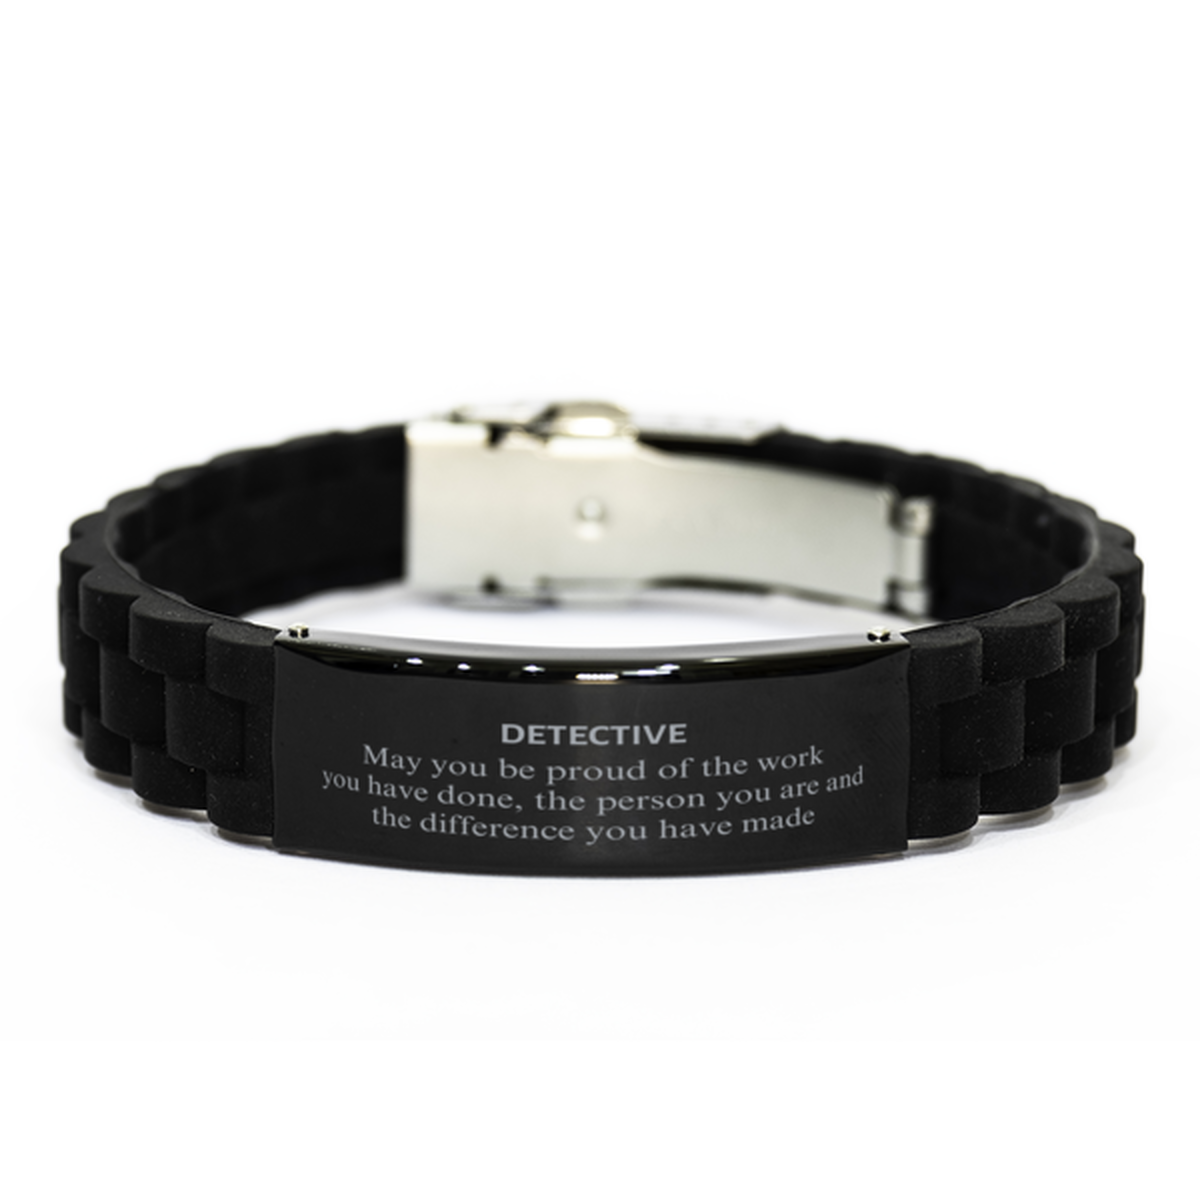 Detective May you be proud of the work you have done, Retirement Detective Black Glidelock Clasp Bracelet for Colleague Appreciation Gifts Amazing for Detective